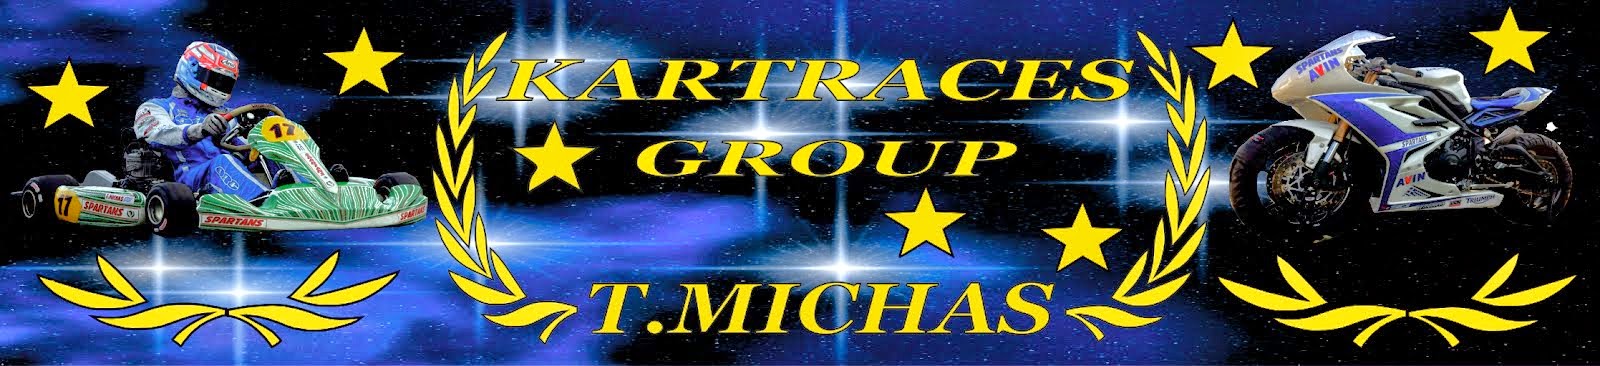 KARTRACES GROUP